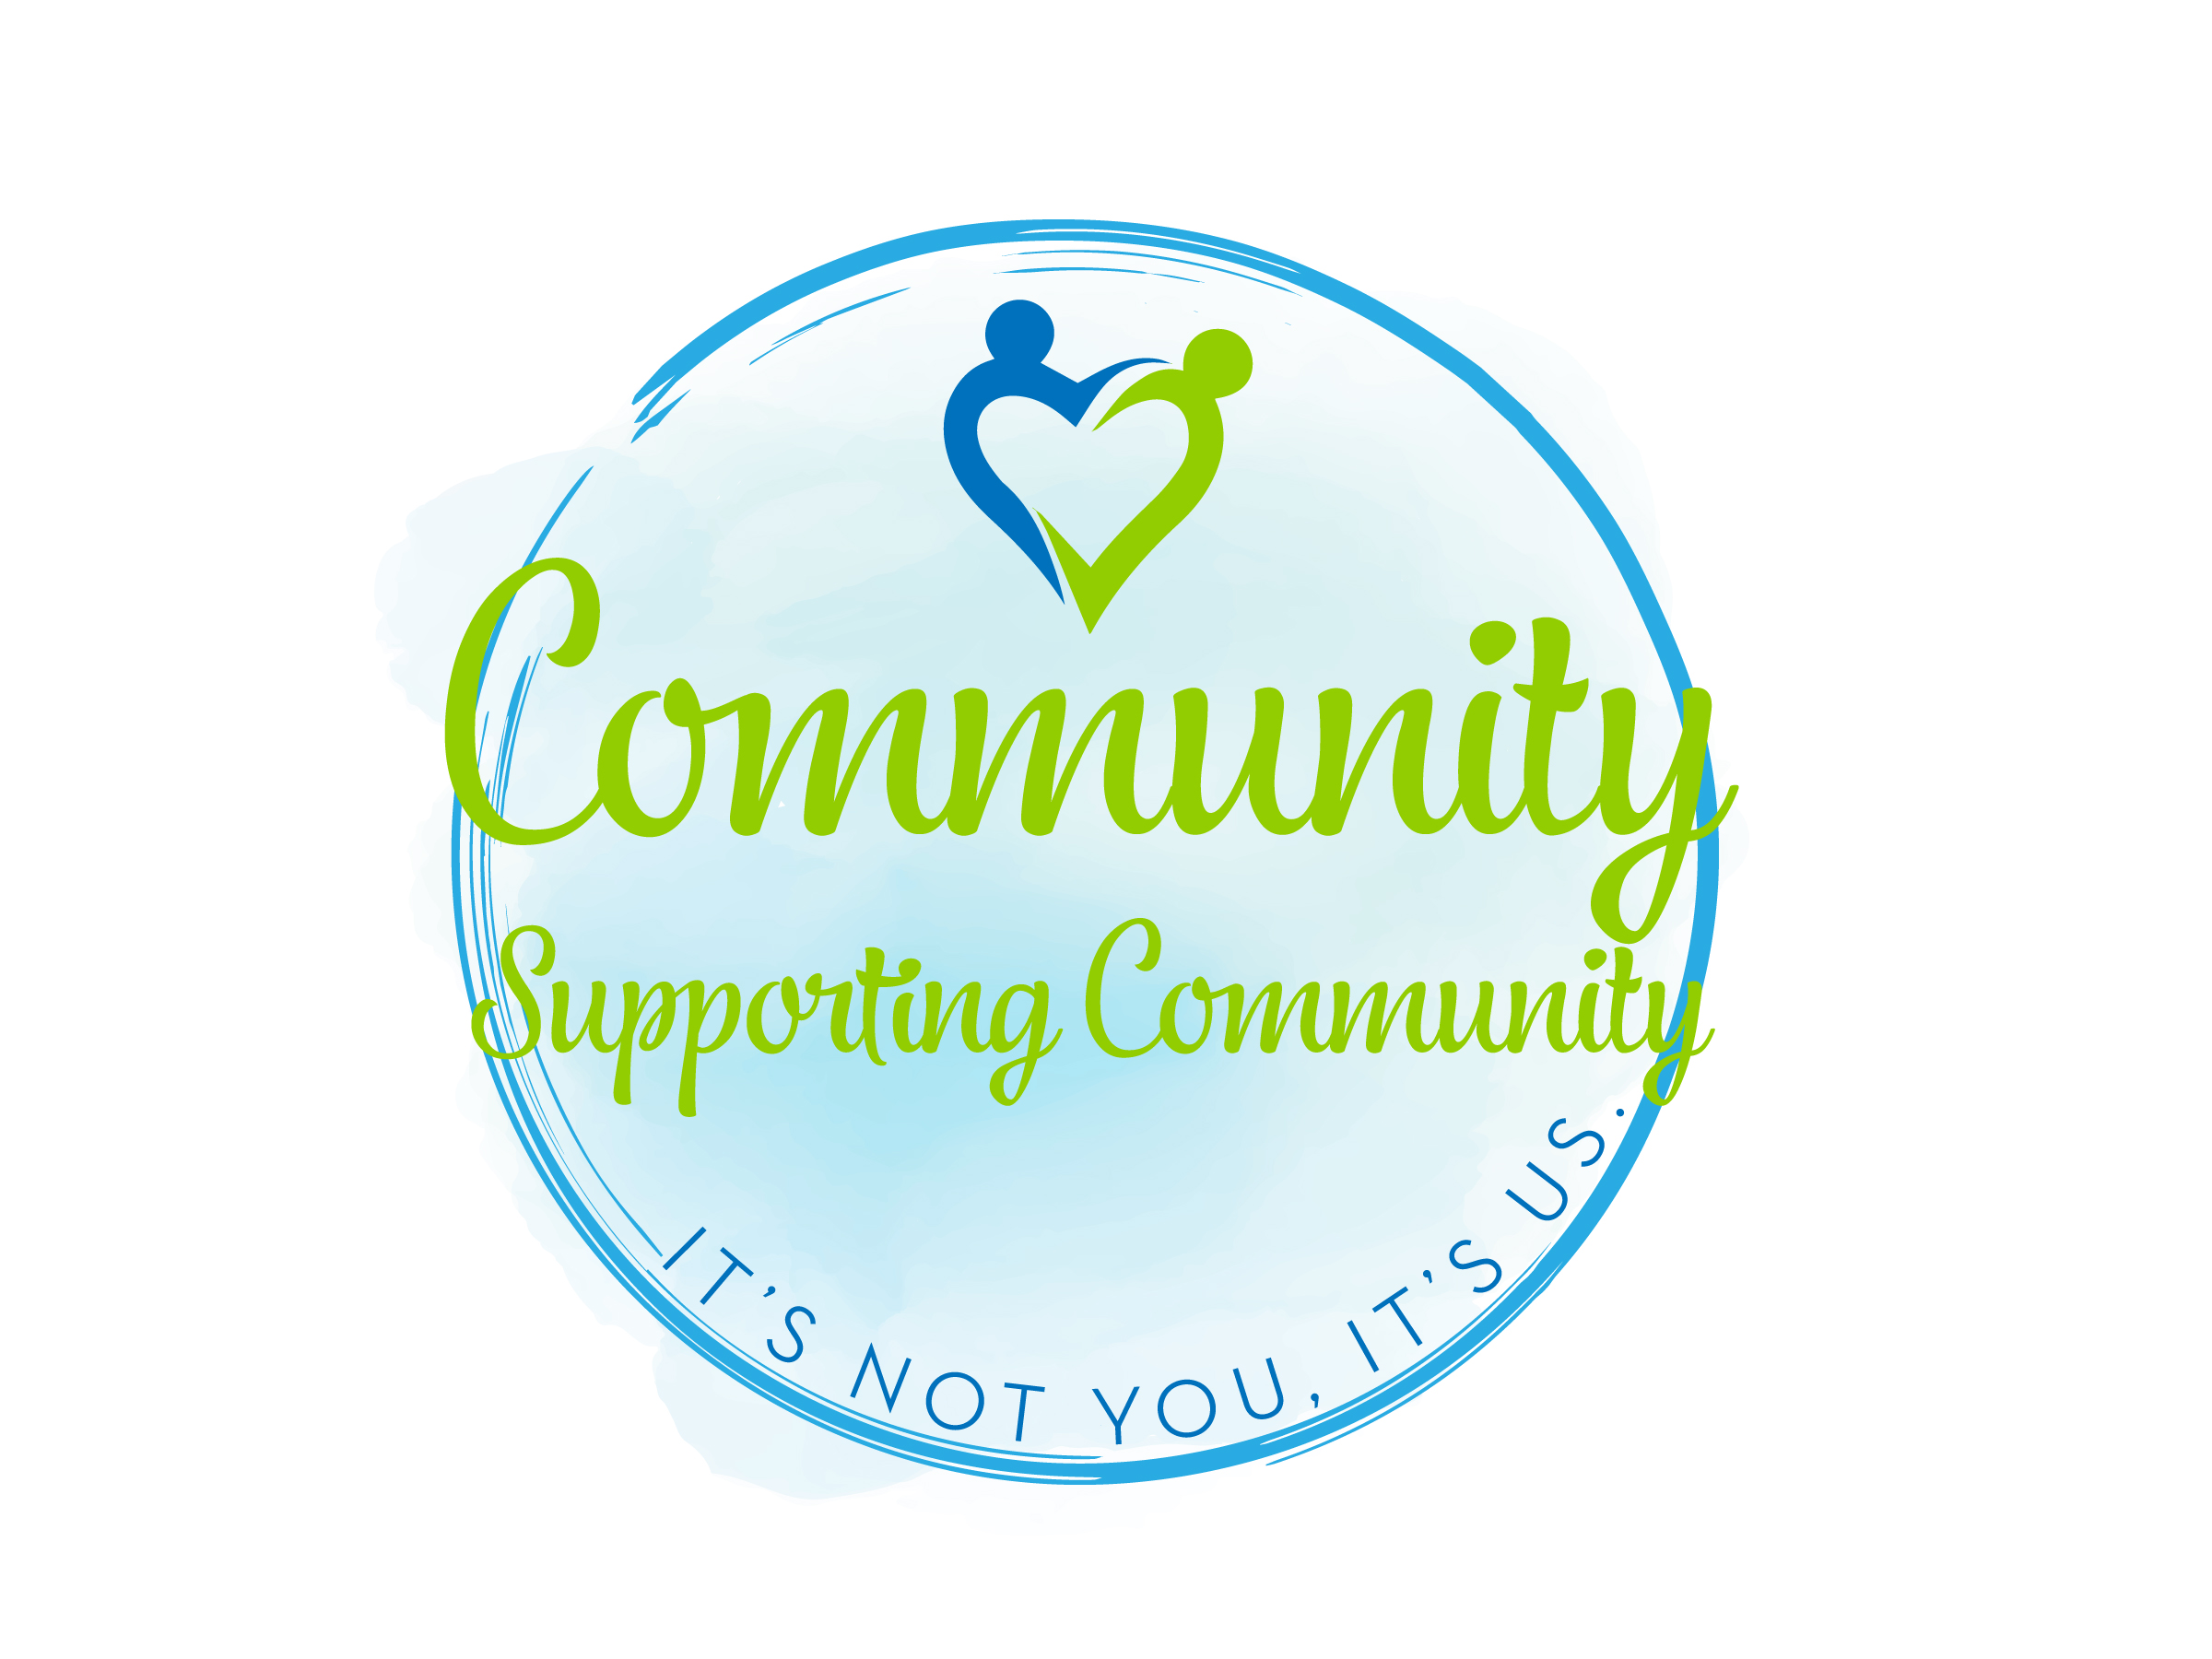 Community Supporting Community - It's not you, it's us!